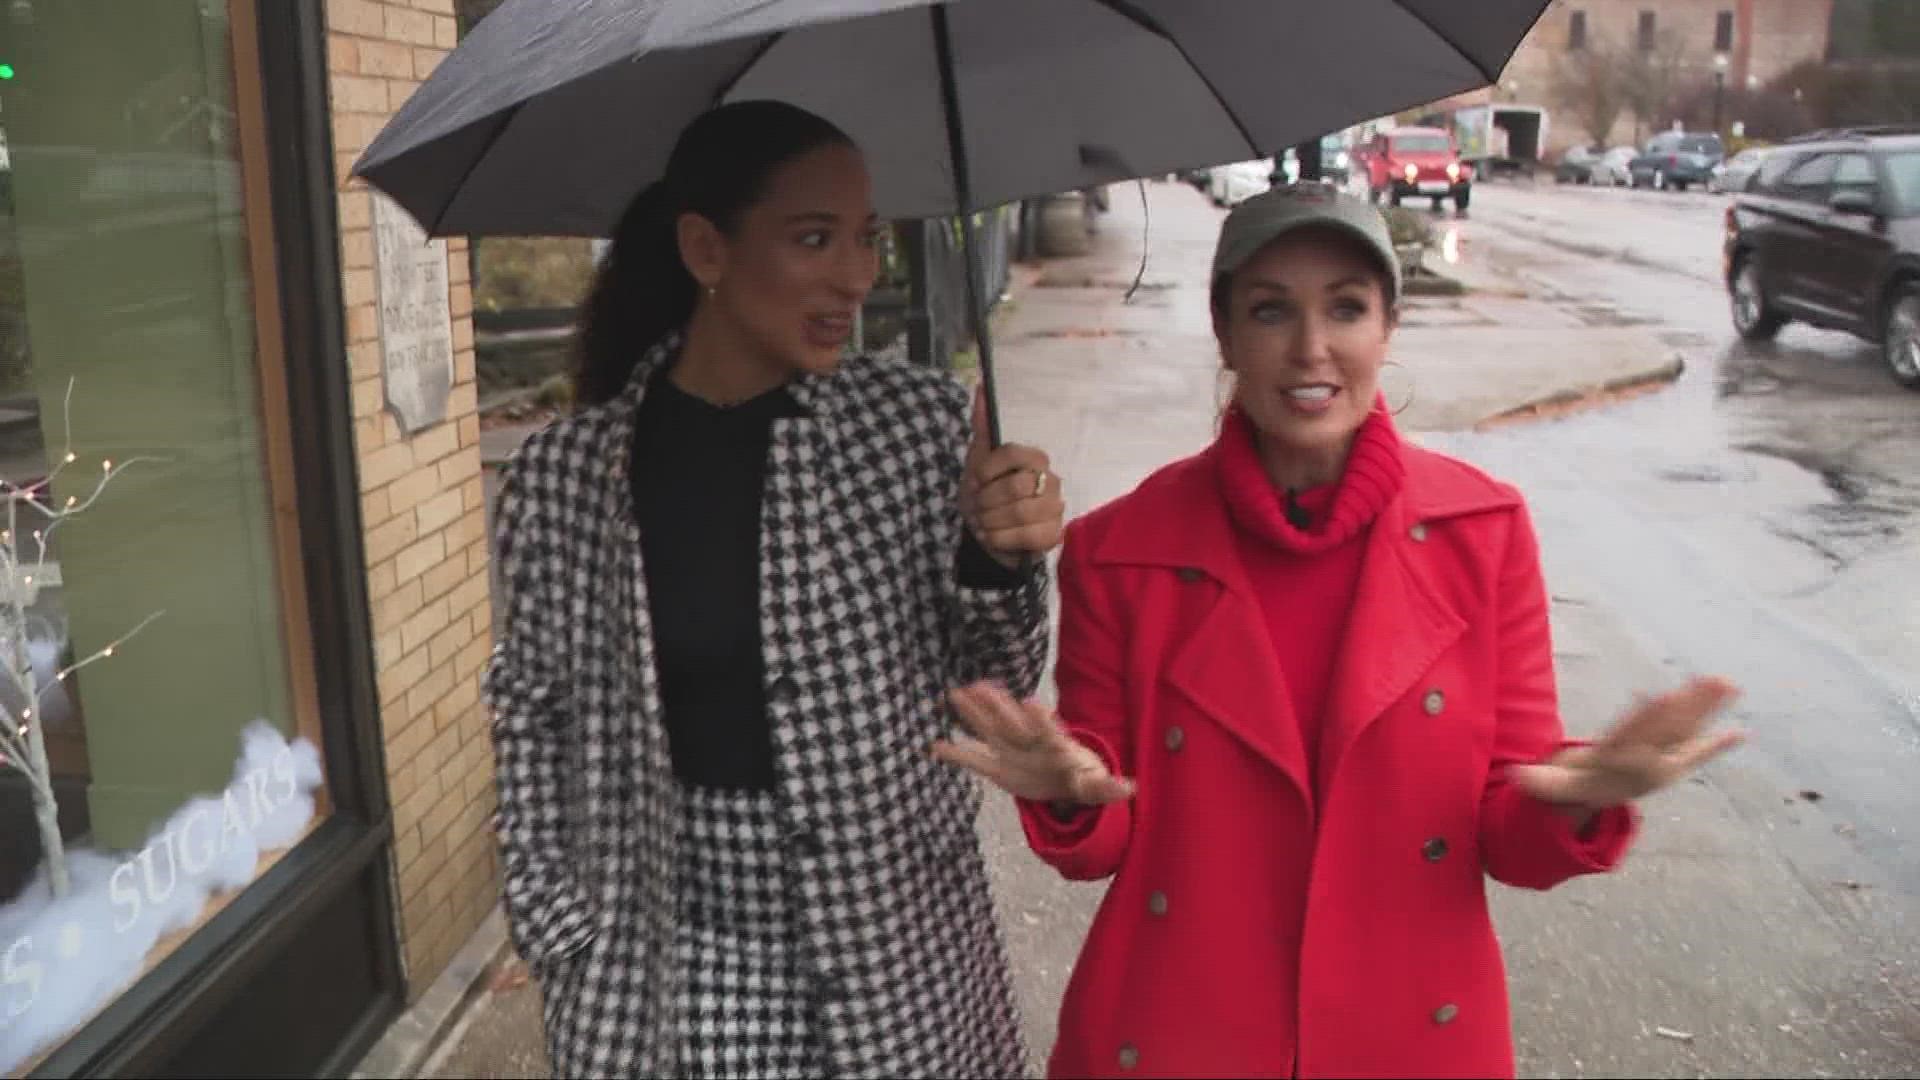 Christi and Carmen take a walk through Chagrin Falls to see all that the charming town has to offer.